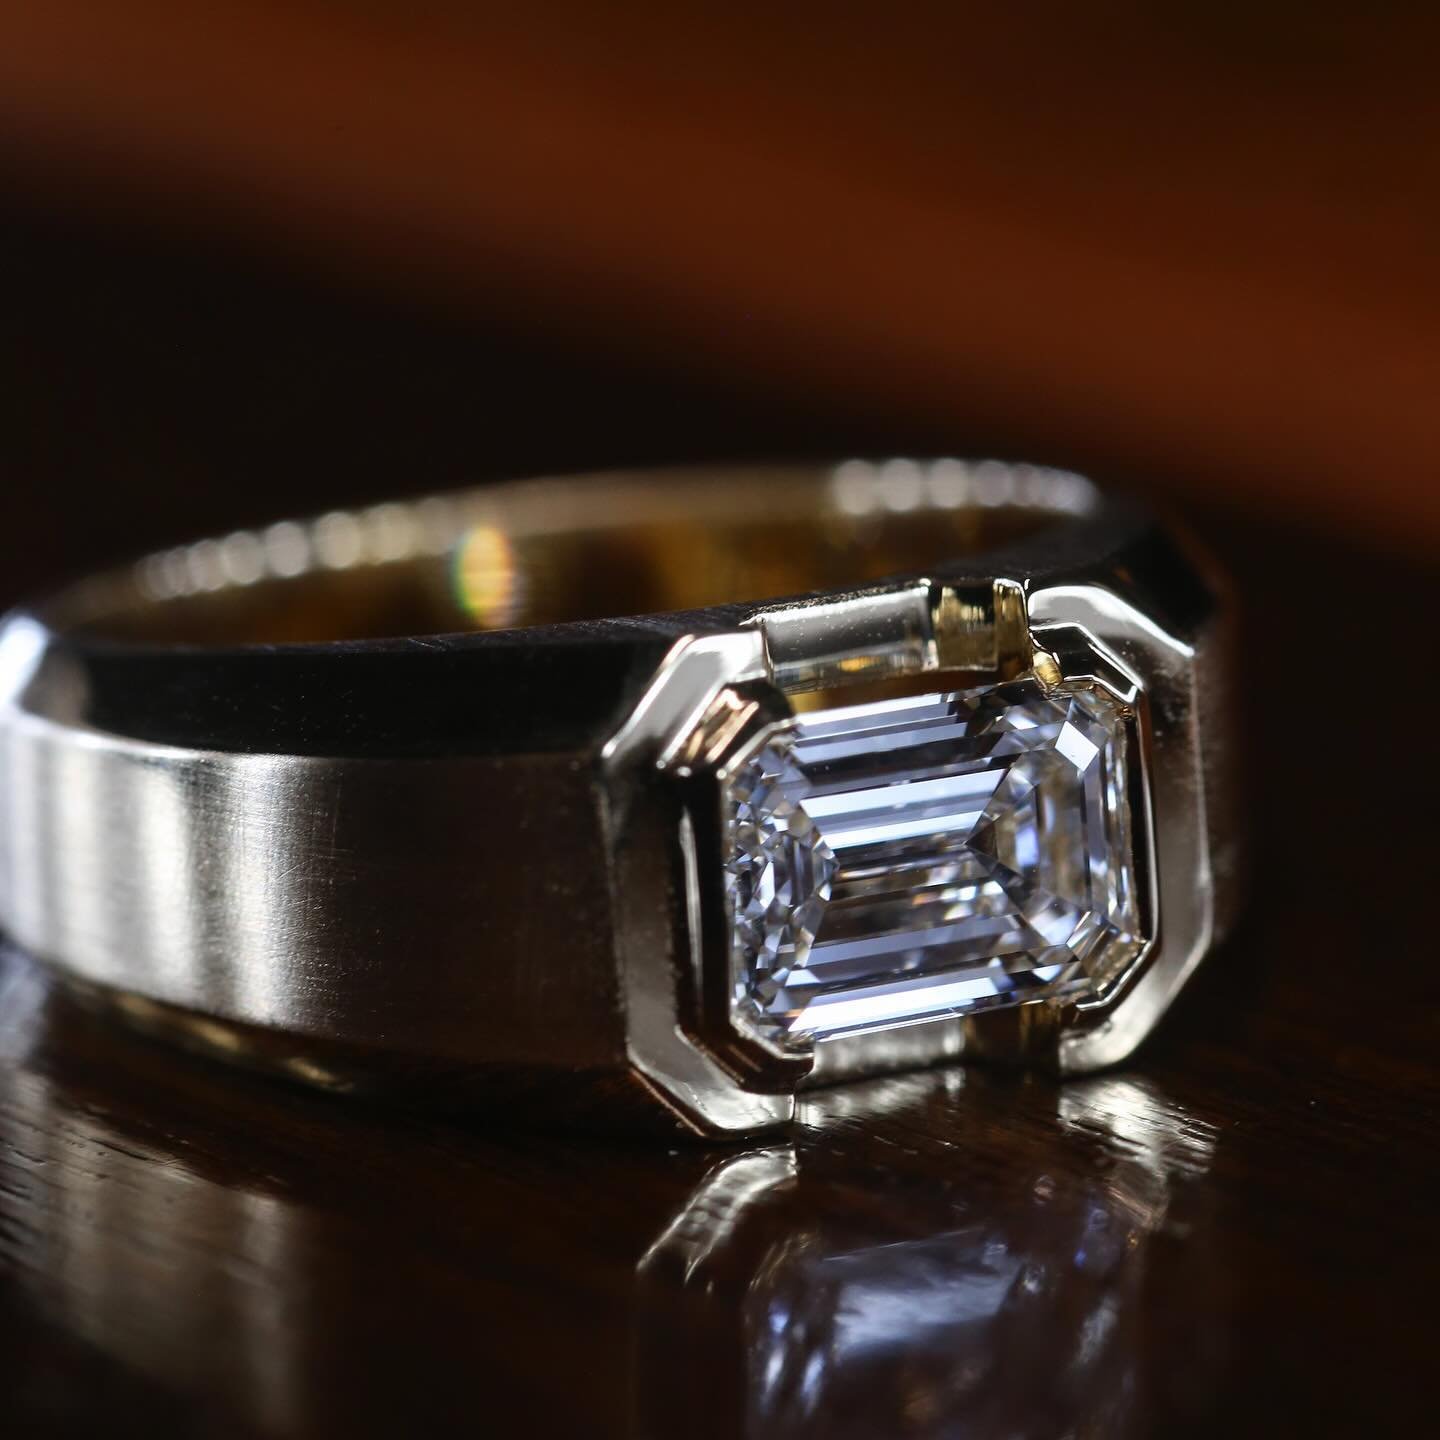 Mens wedding bands can also make a statement. Check out this 1.50ct emerald cut diamond rub-over set in to a chunky yet sleek 18k yellow gold ring. 

#diamond #engagementring #diamondring #passion #craft #finejewelry #diamondring